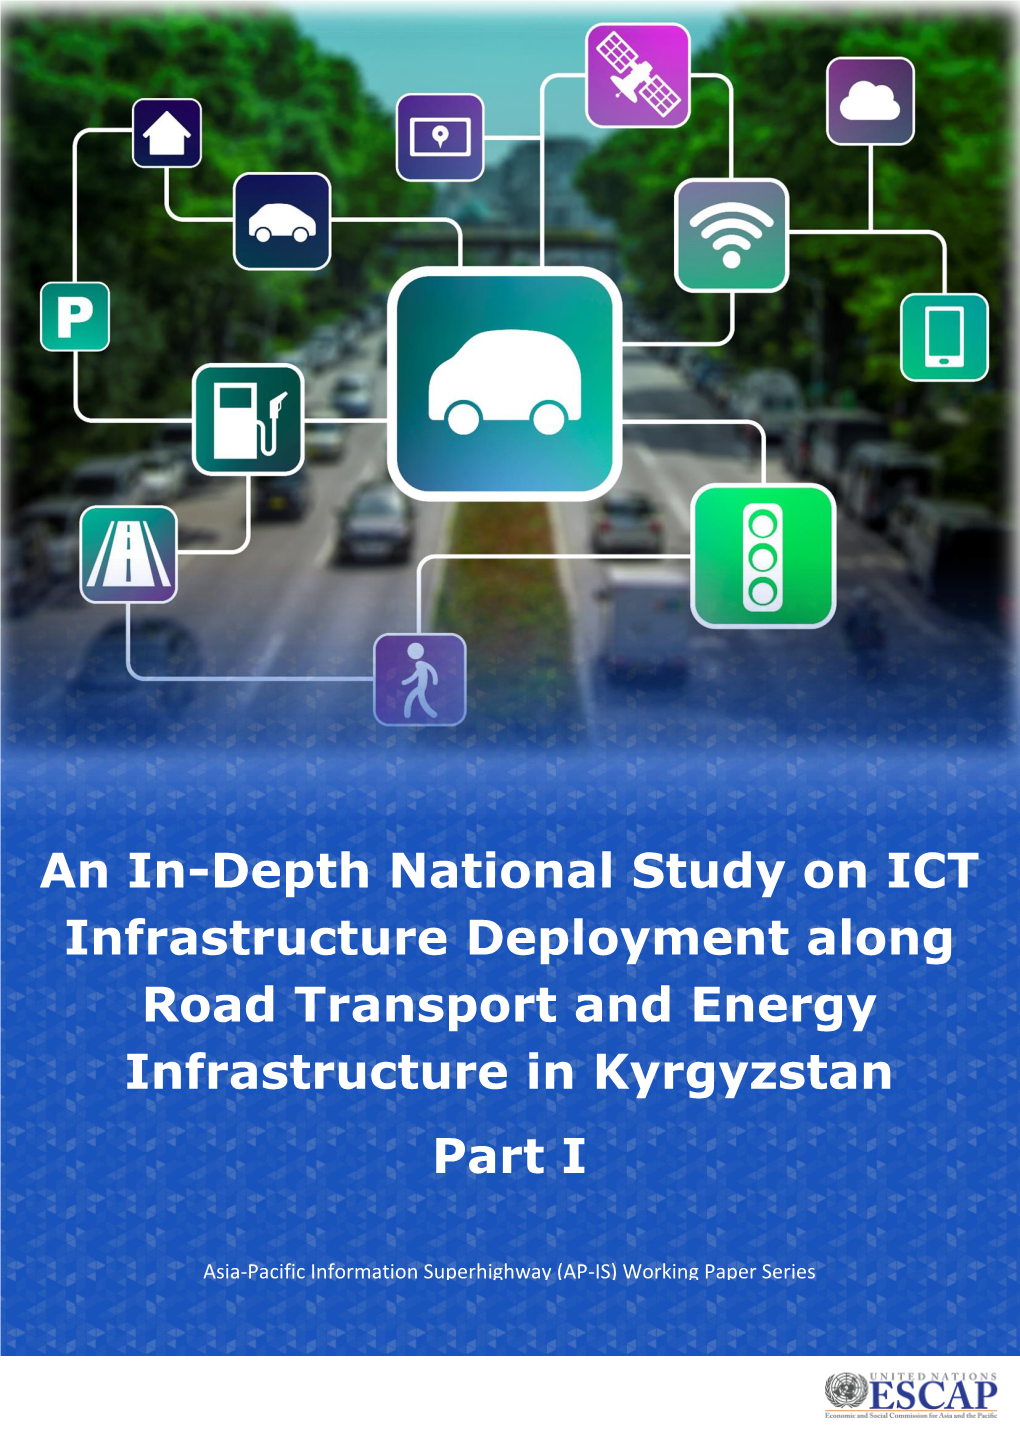 An In-Depth National Study on ICT Infrastructure Deployment Along Road Transport and Energy Infrastructure in Kyrgyzstan Part I